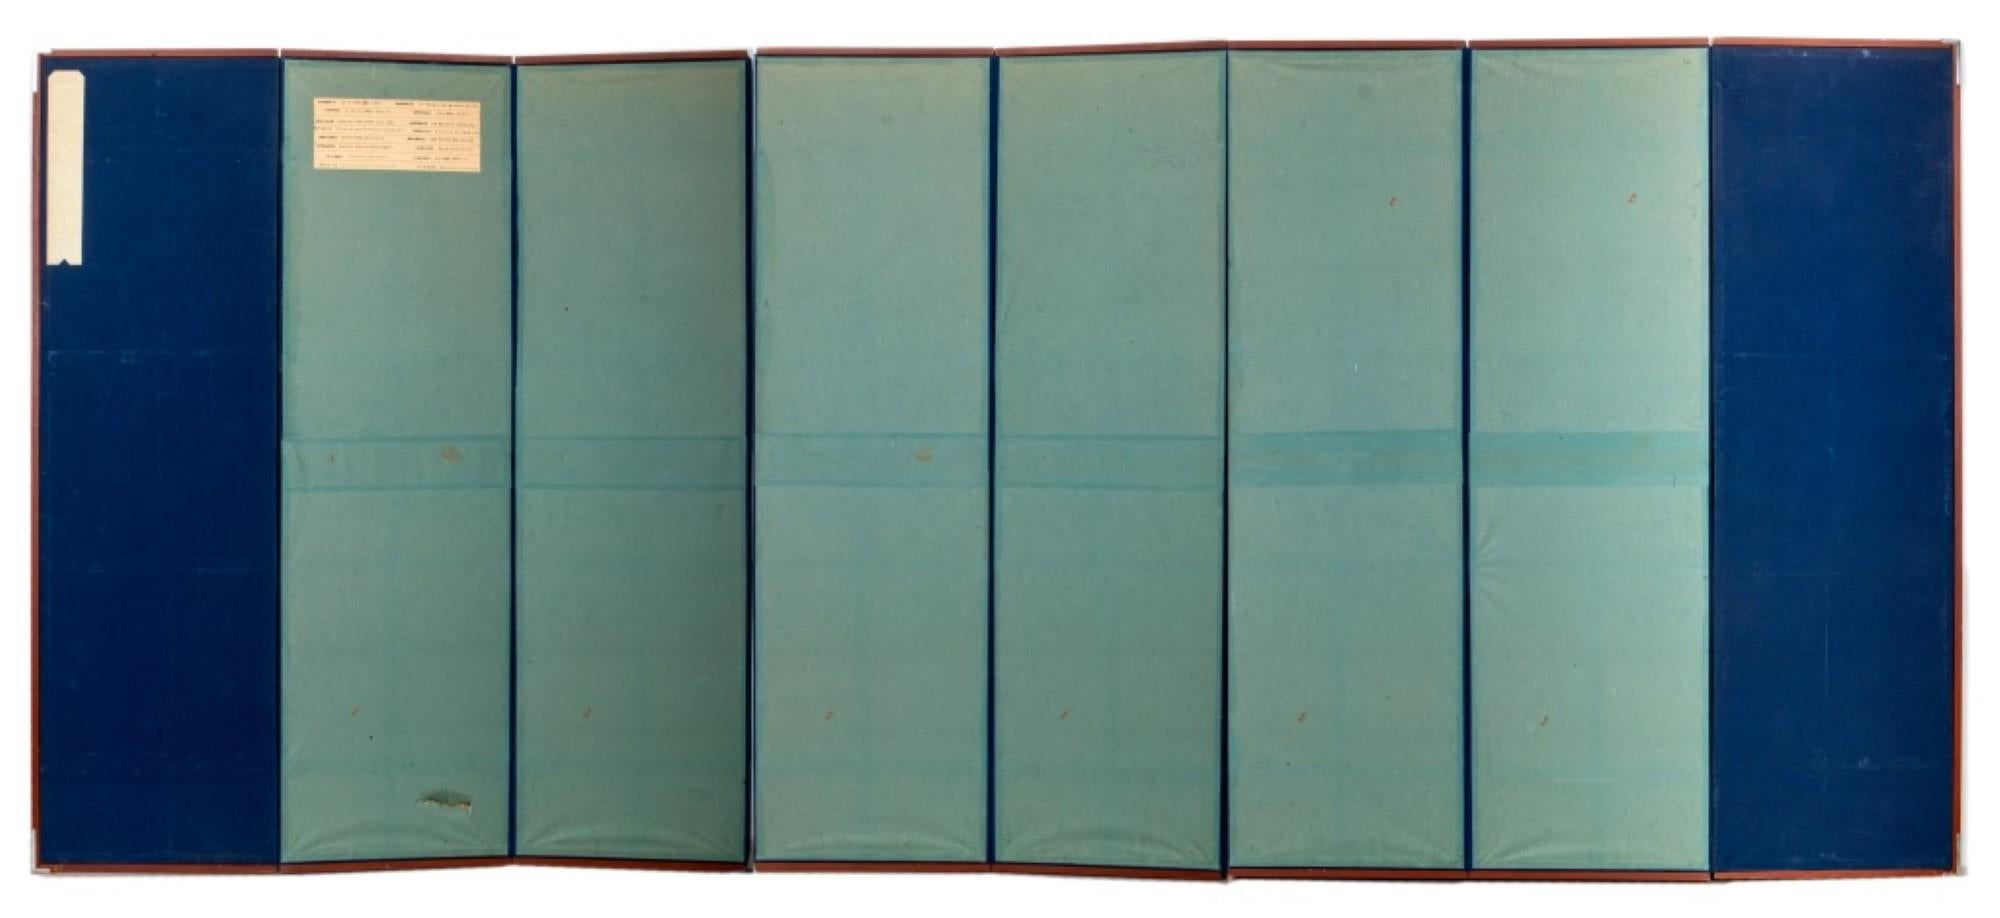 Eight-Panel Chinese Printed Calligraphy Screen In Good Condition For Sale In New York, NY